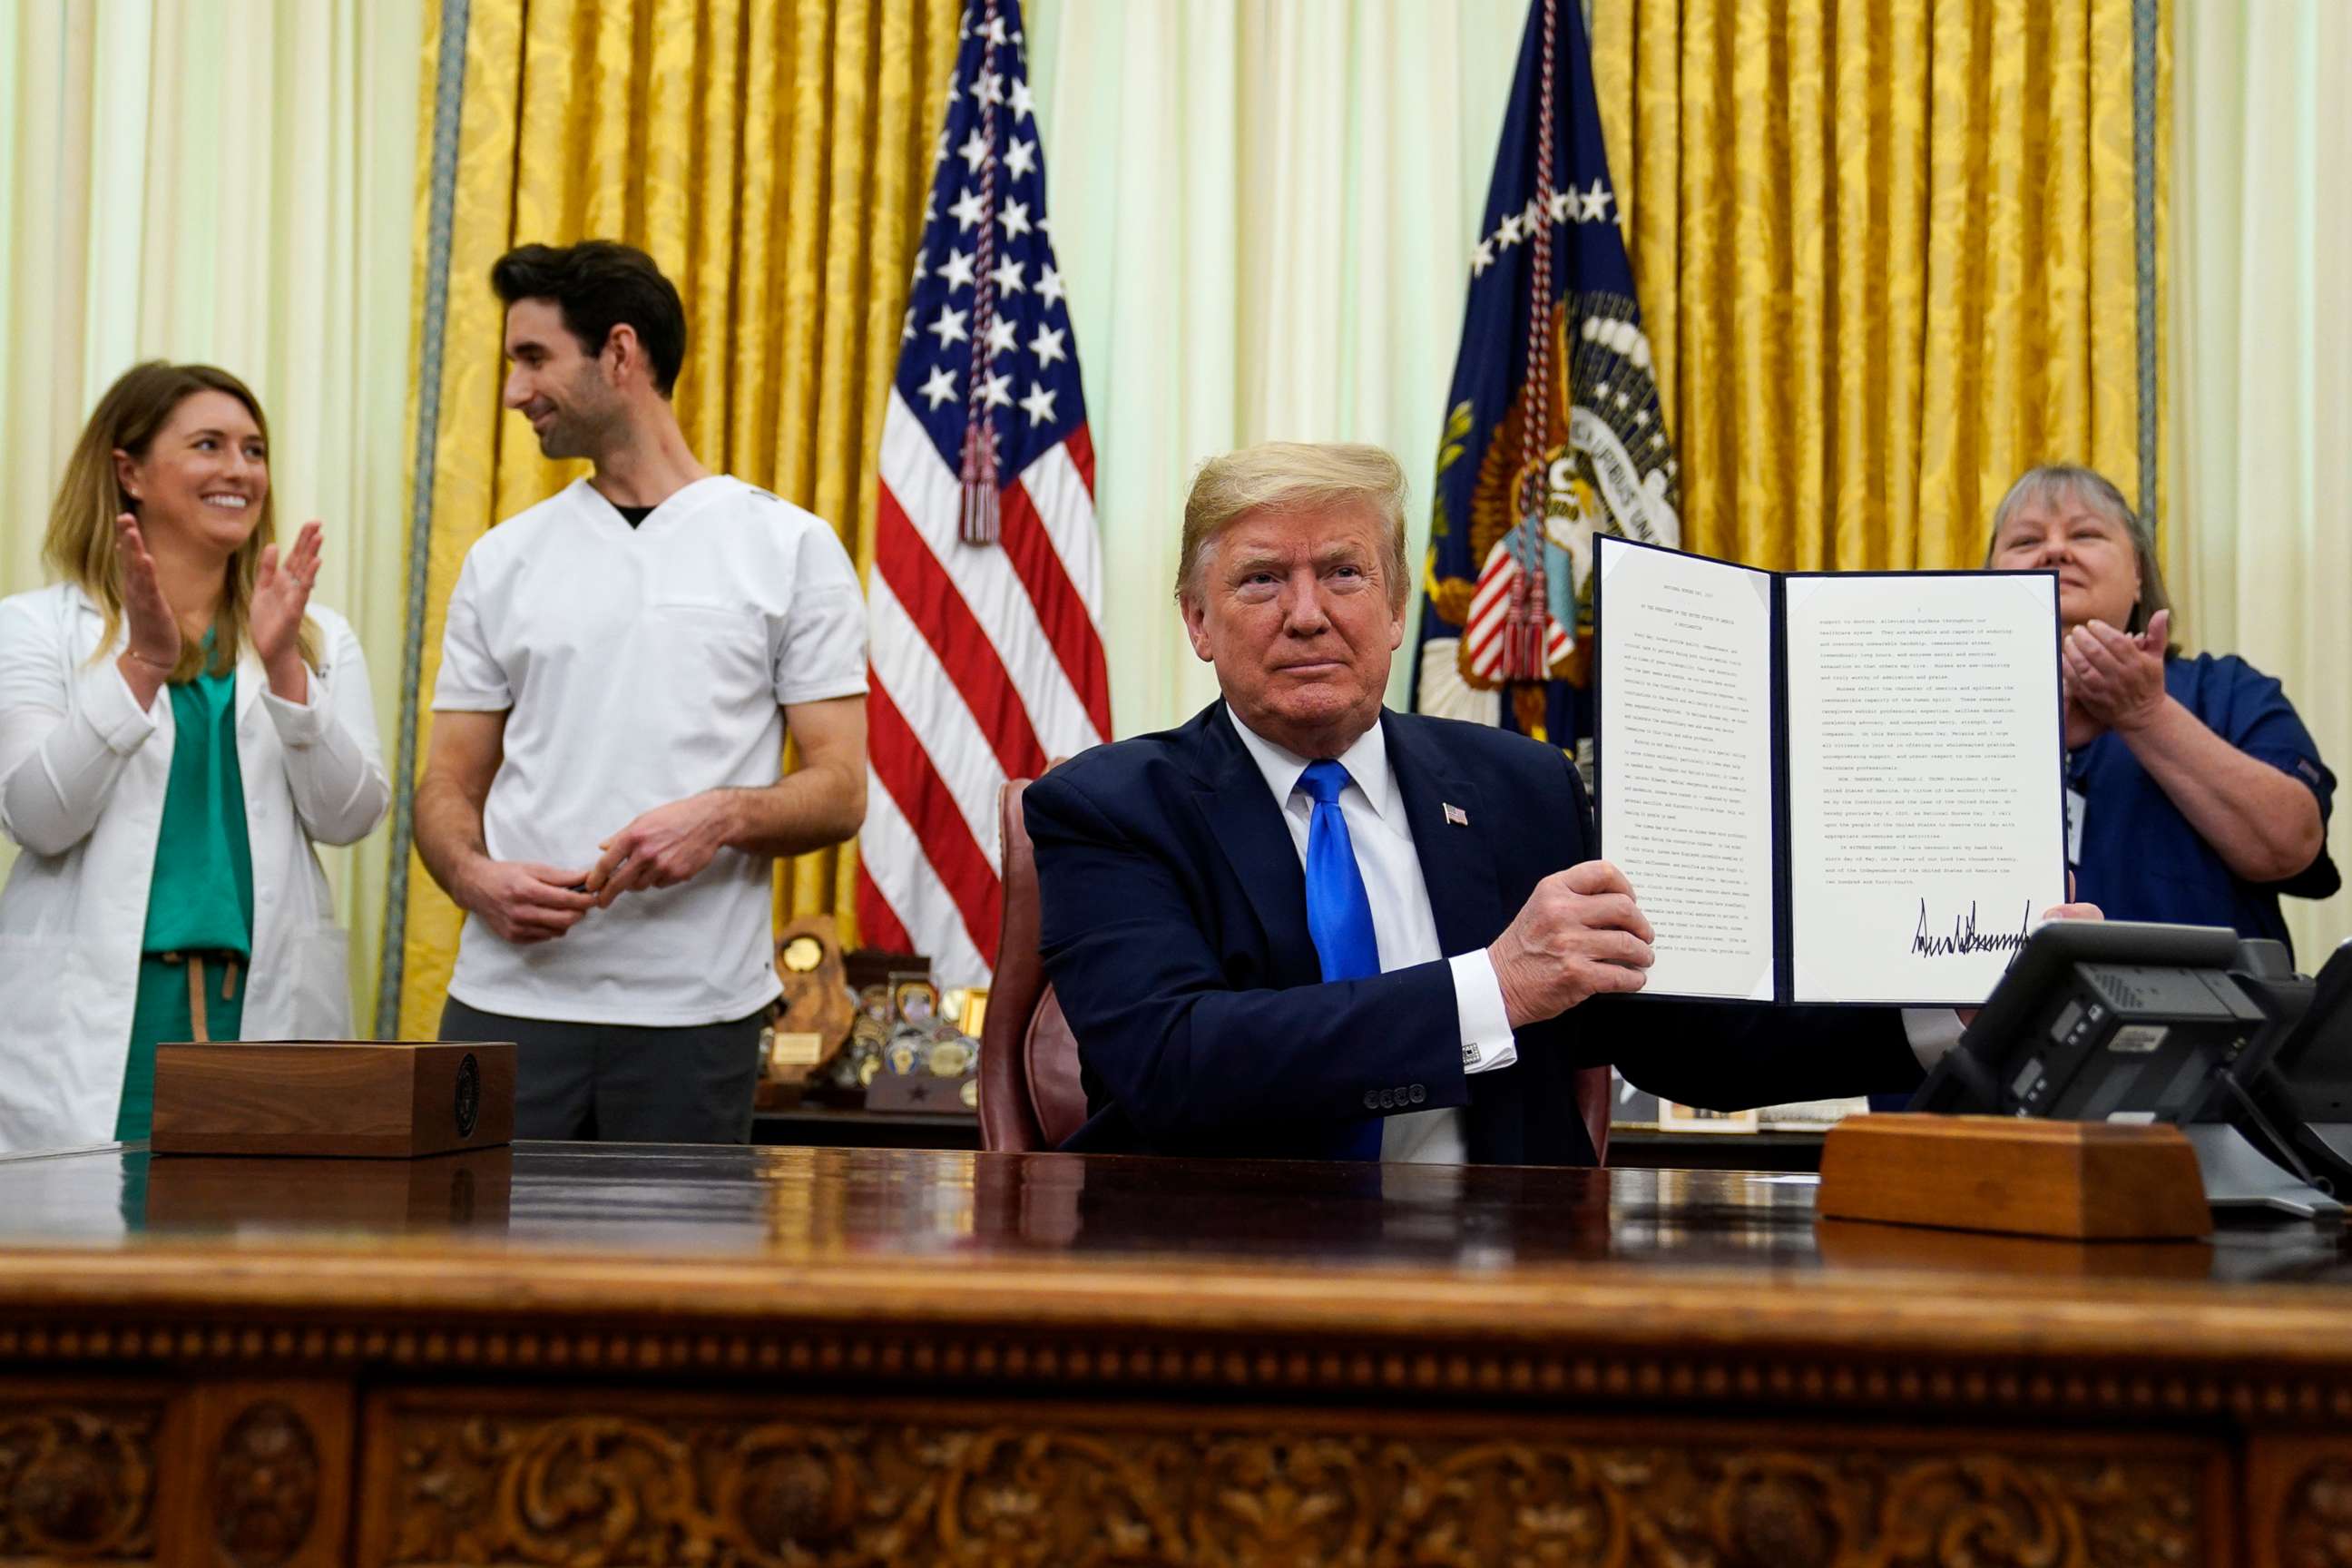 PHOTO: President Donald Trump holds a signed proclamation in honor of World Nurses Day during an event in the Oval Office of the White House, May 6, 2020, in Washington.